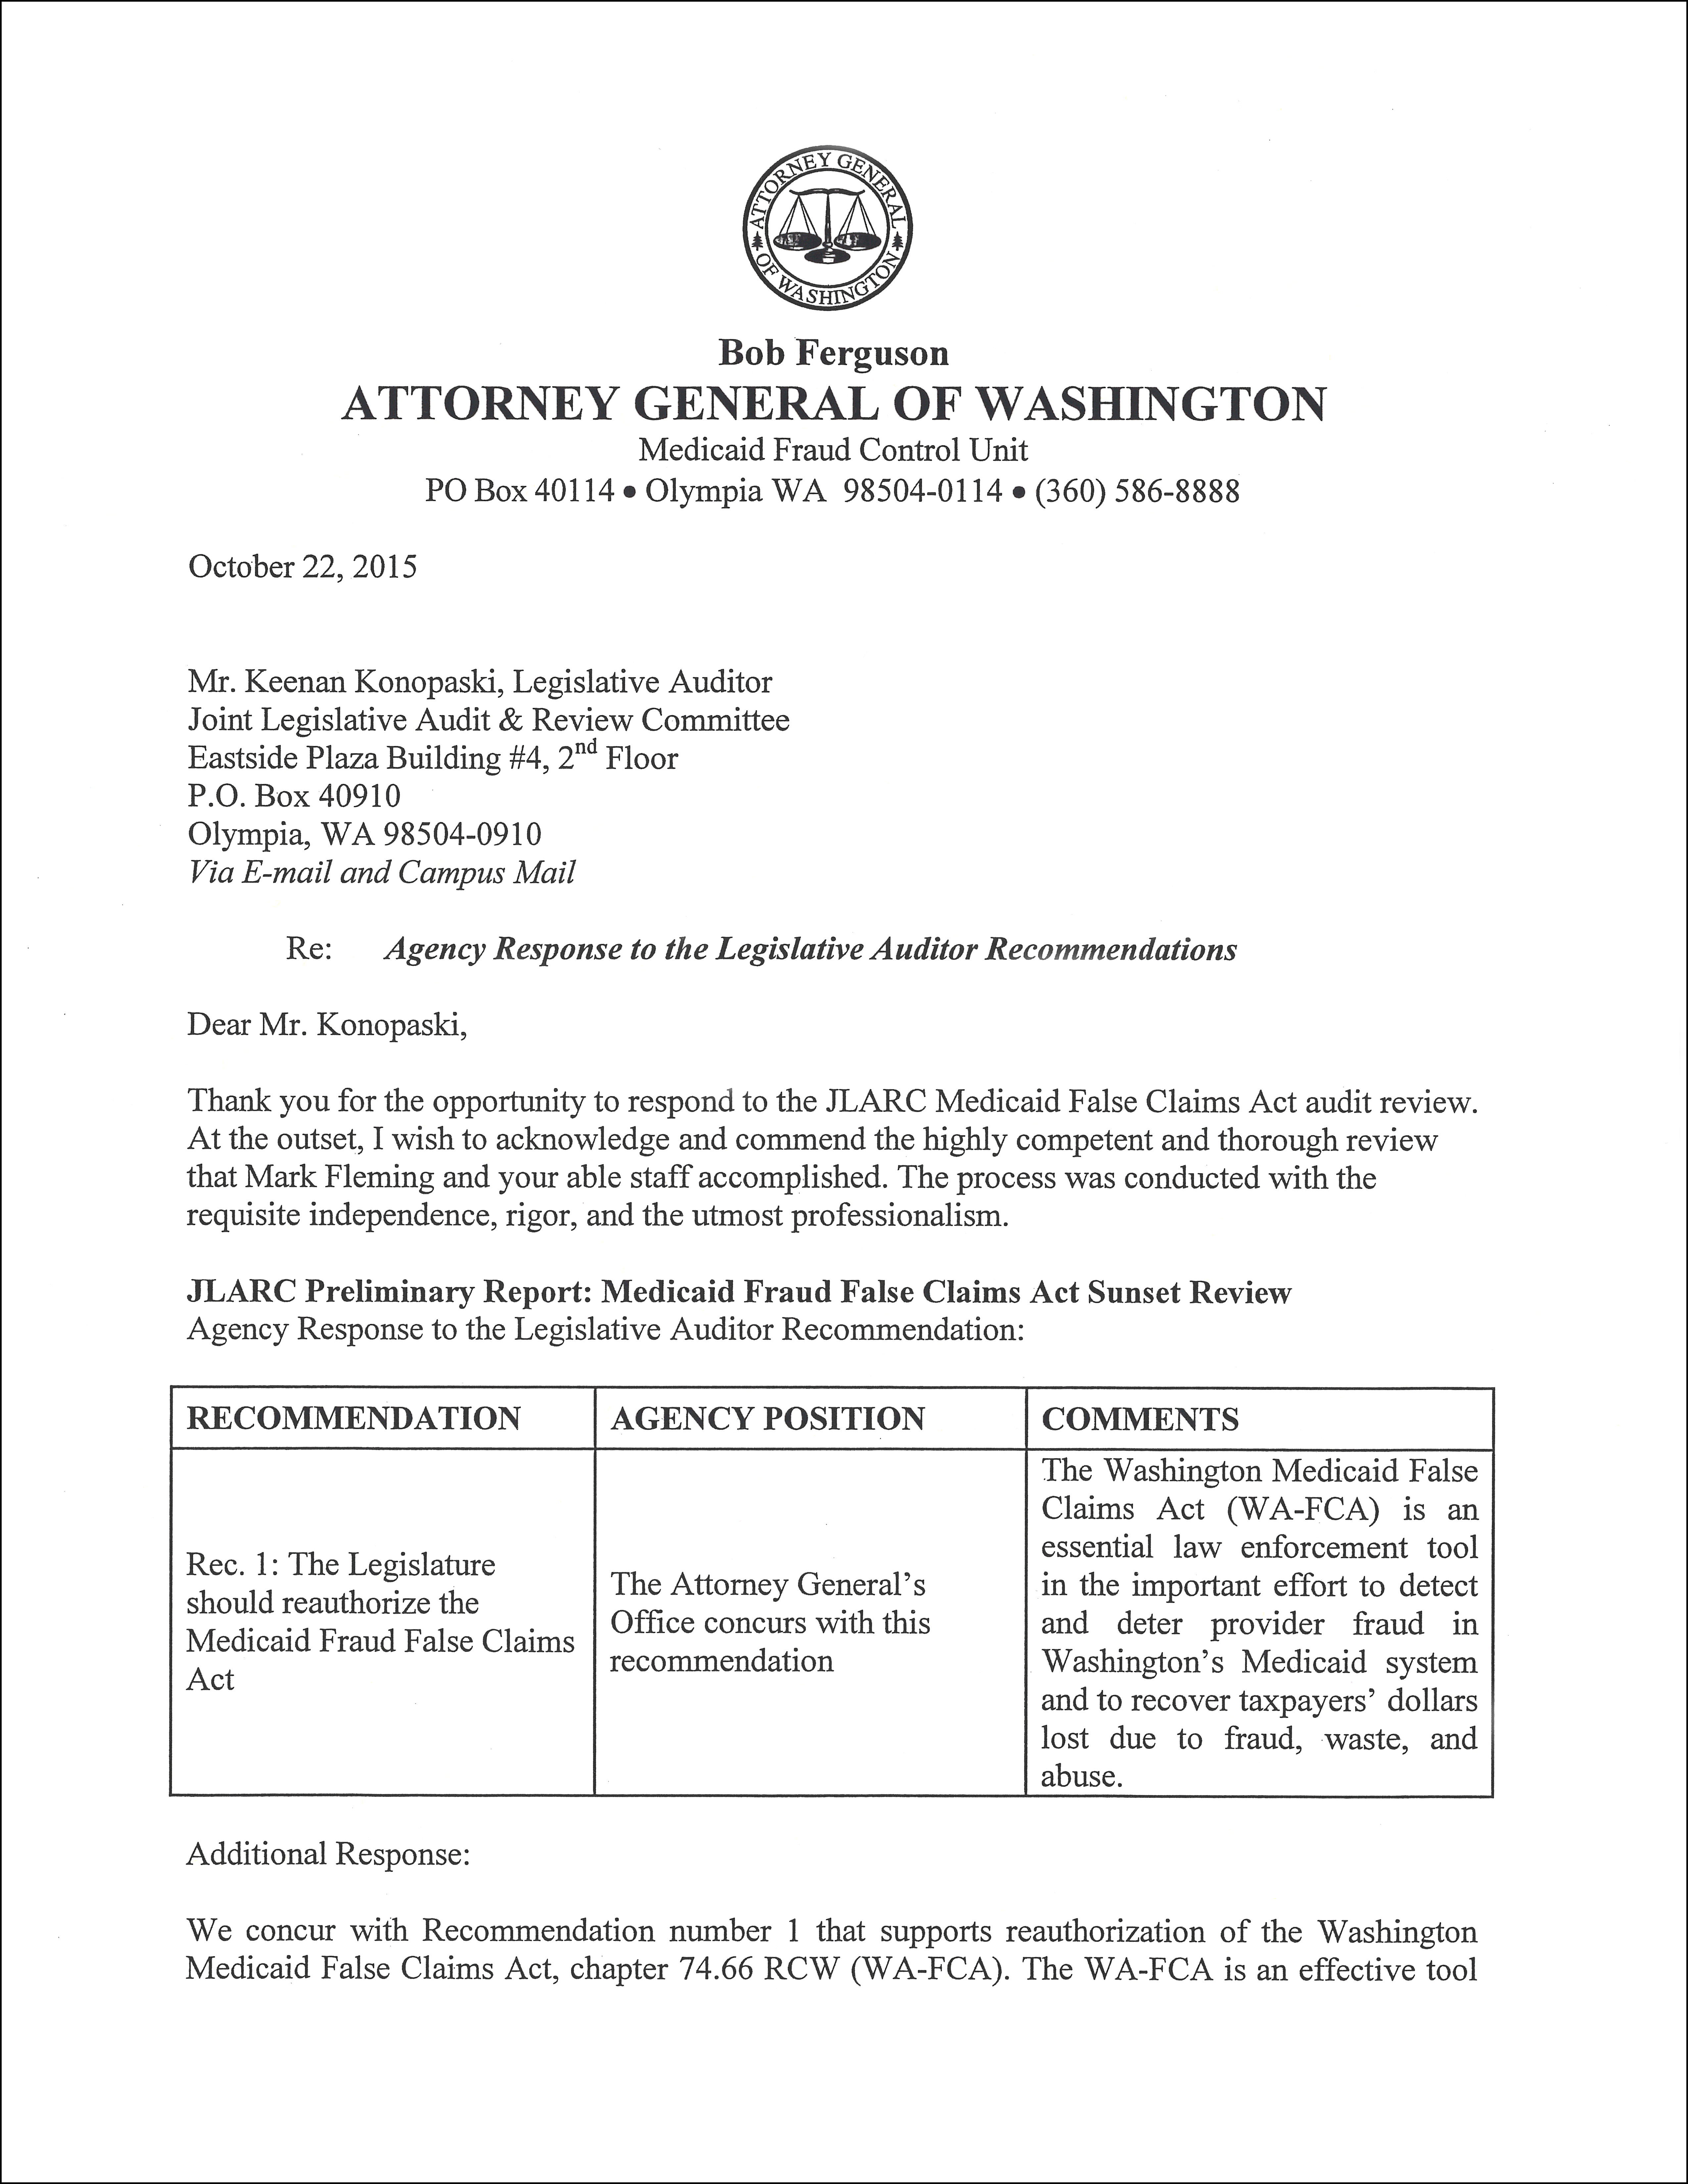 Second page of Attorney General's Response. The Attorney General's Office Concurs with the recommendation. Signed by Senior Assistant Attorney General Douglas D. Walsh